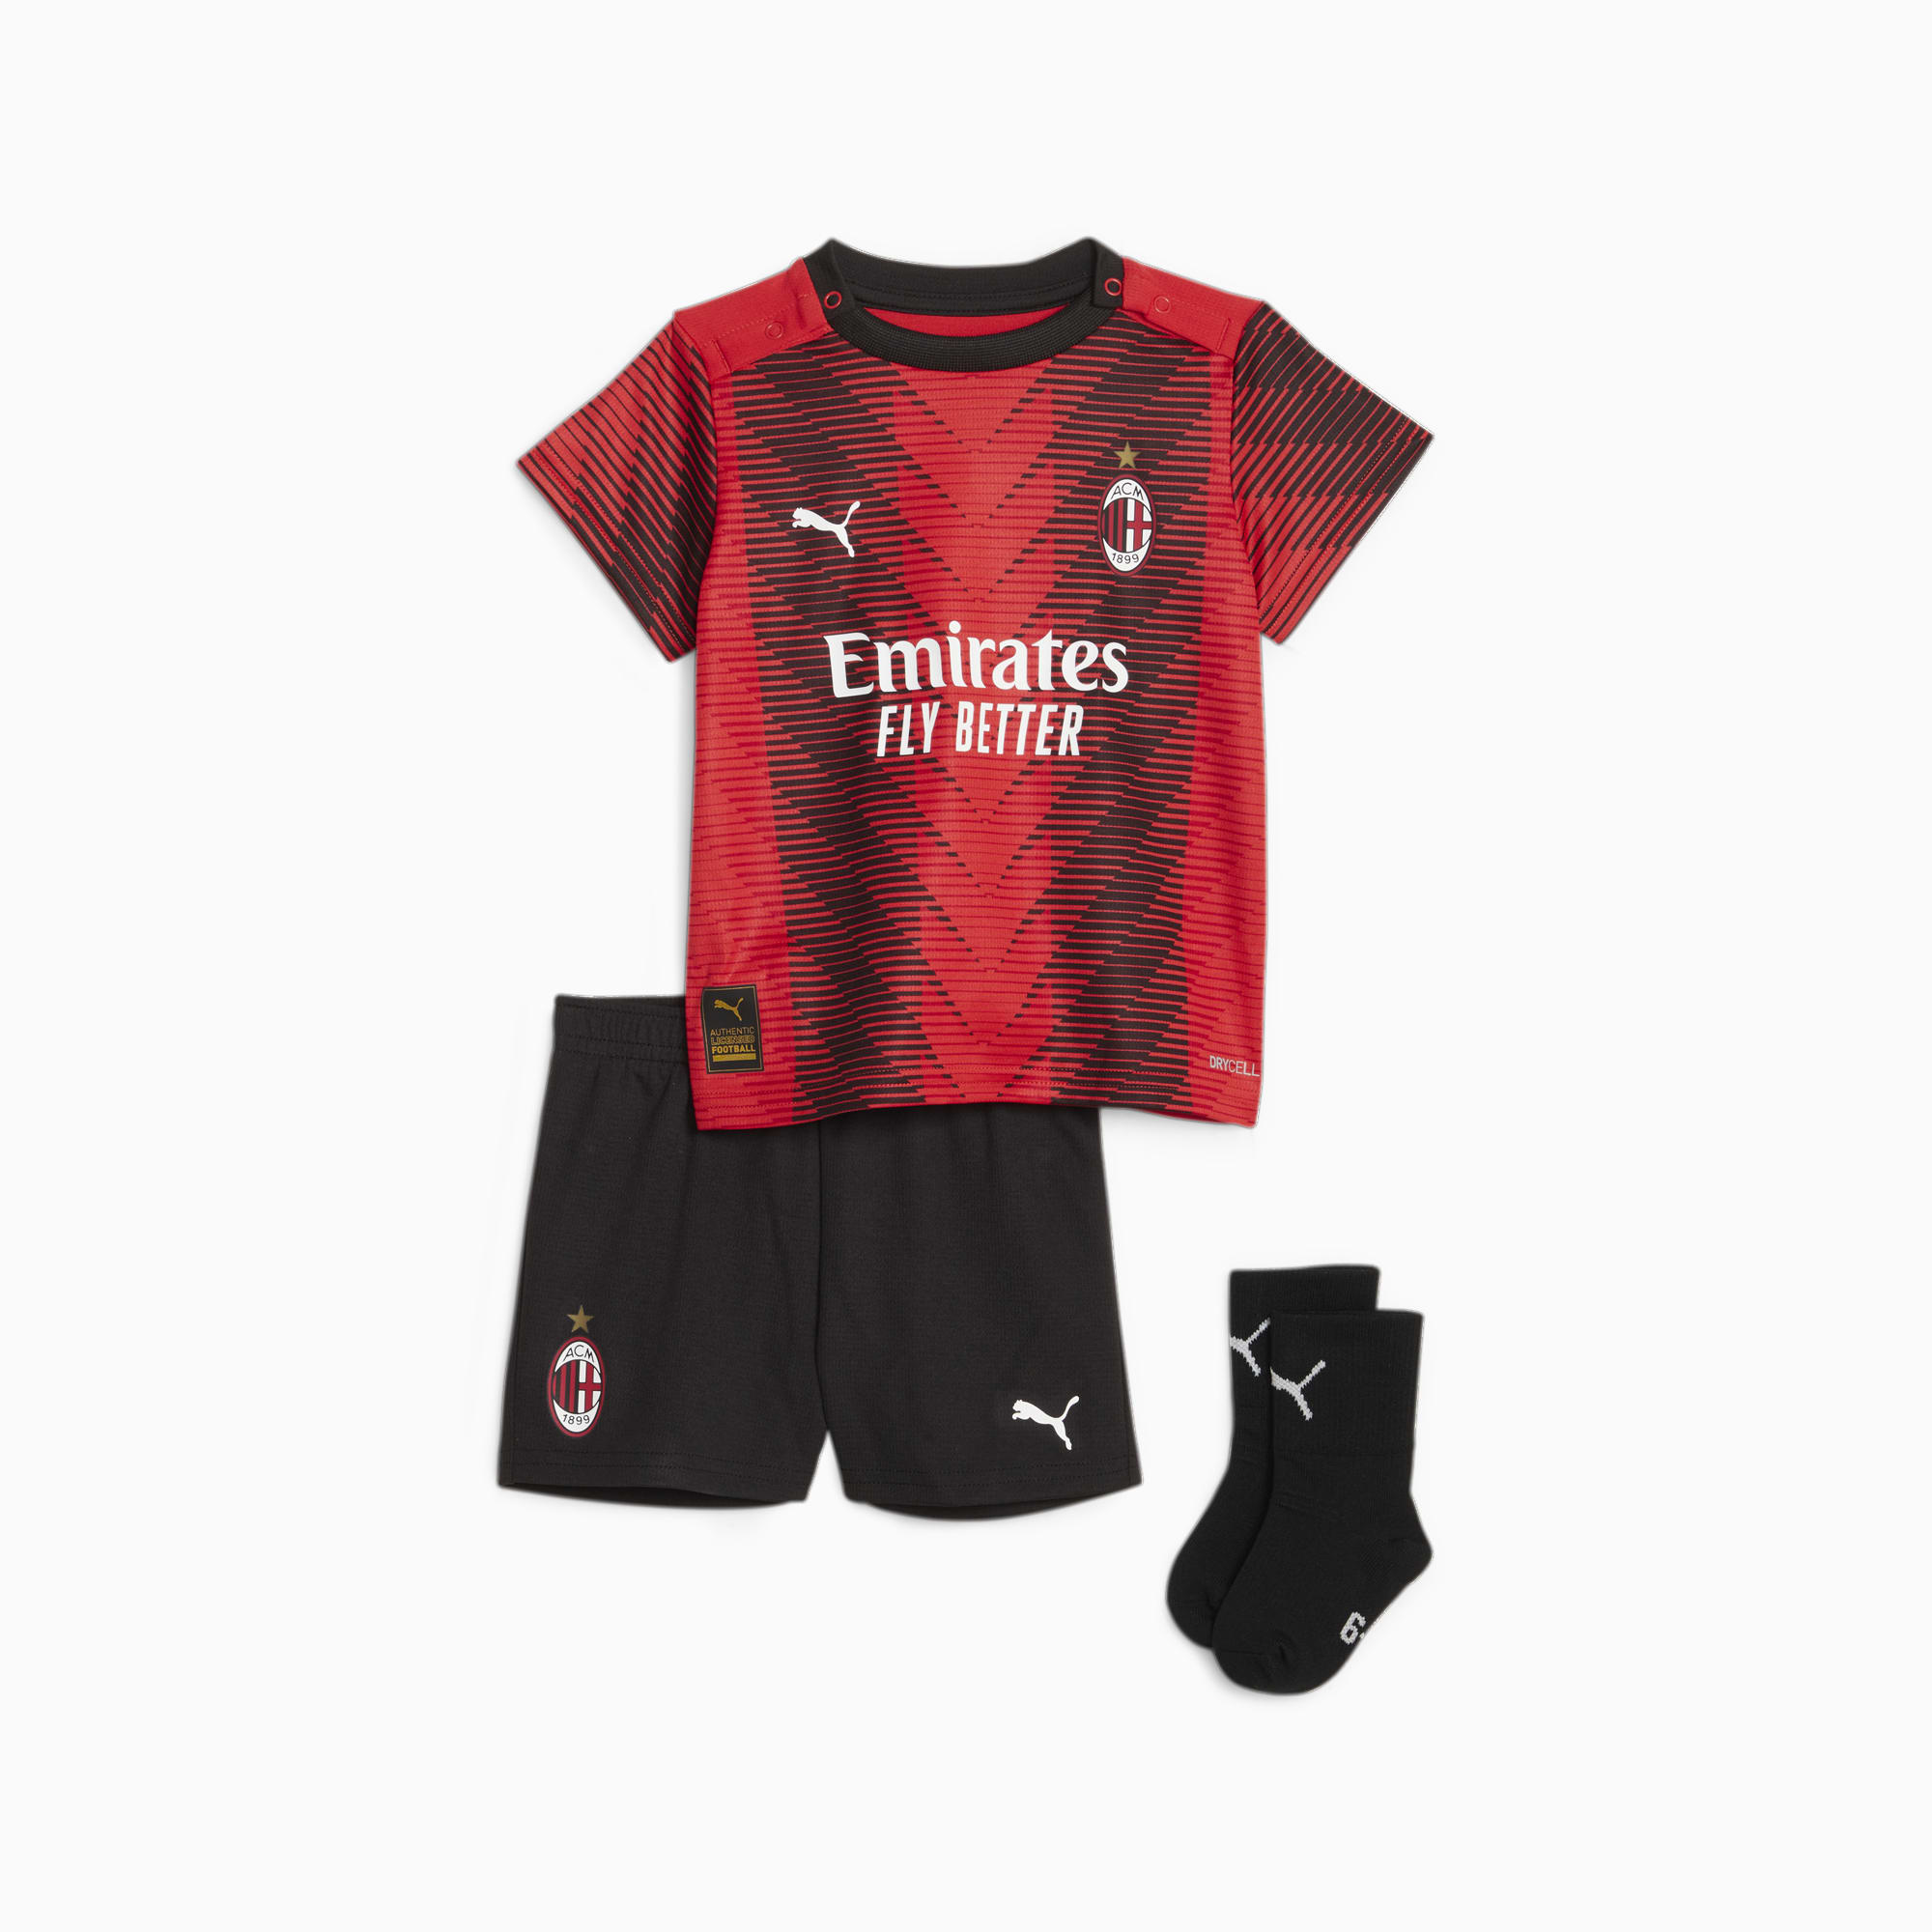 PUMA A.C. Milan 23/24 Home Baby Kit, For All Time Red/Black, Size 74, Clothing